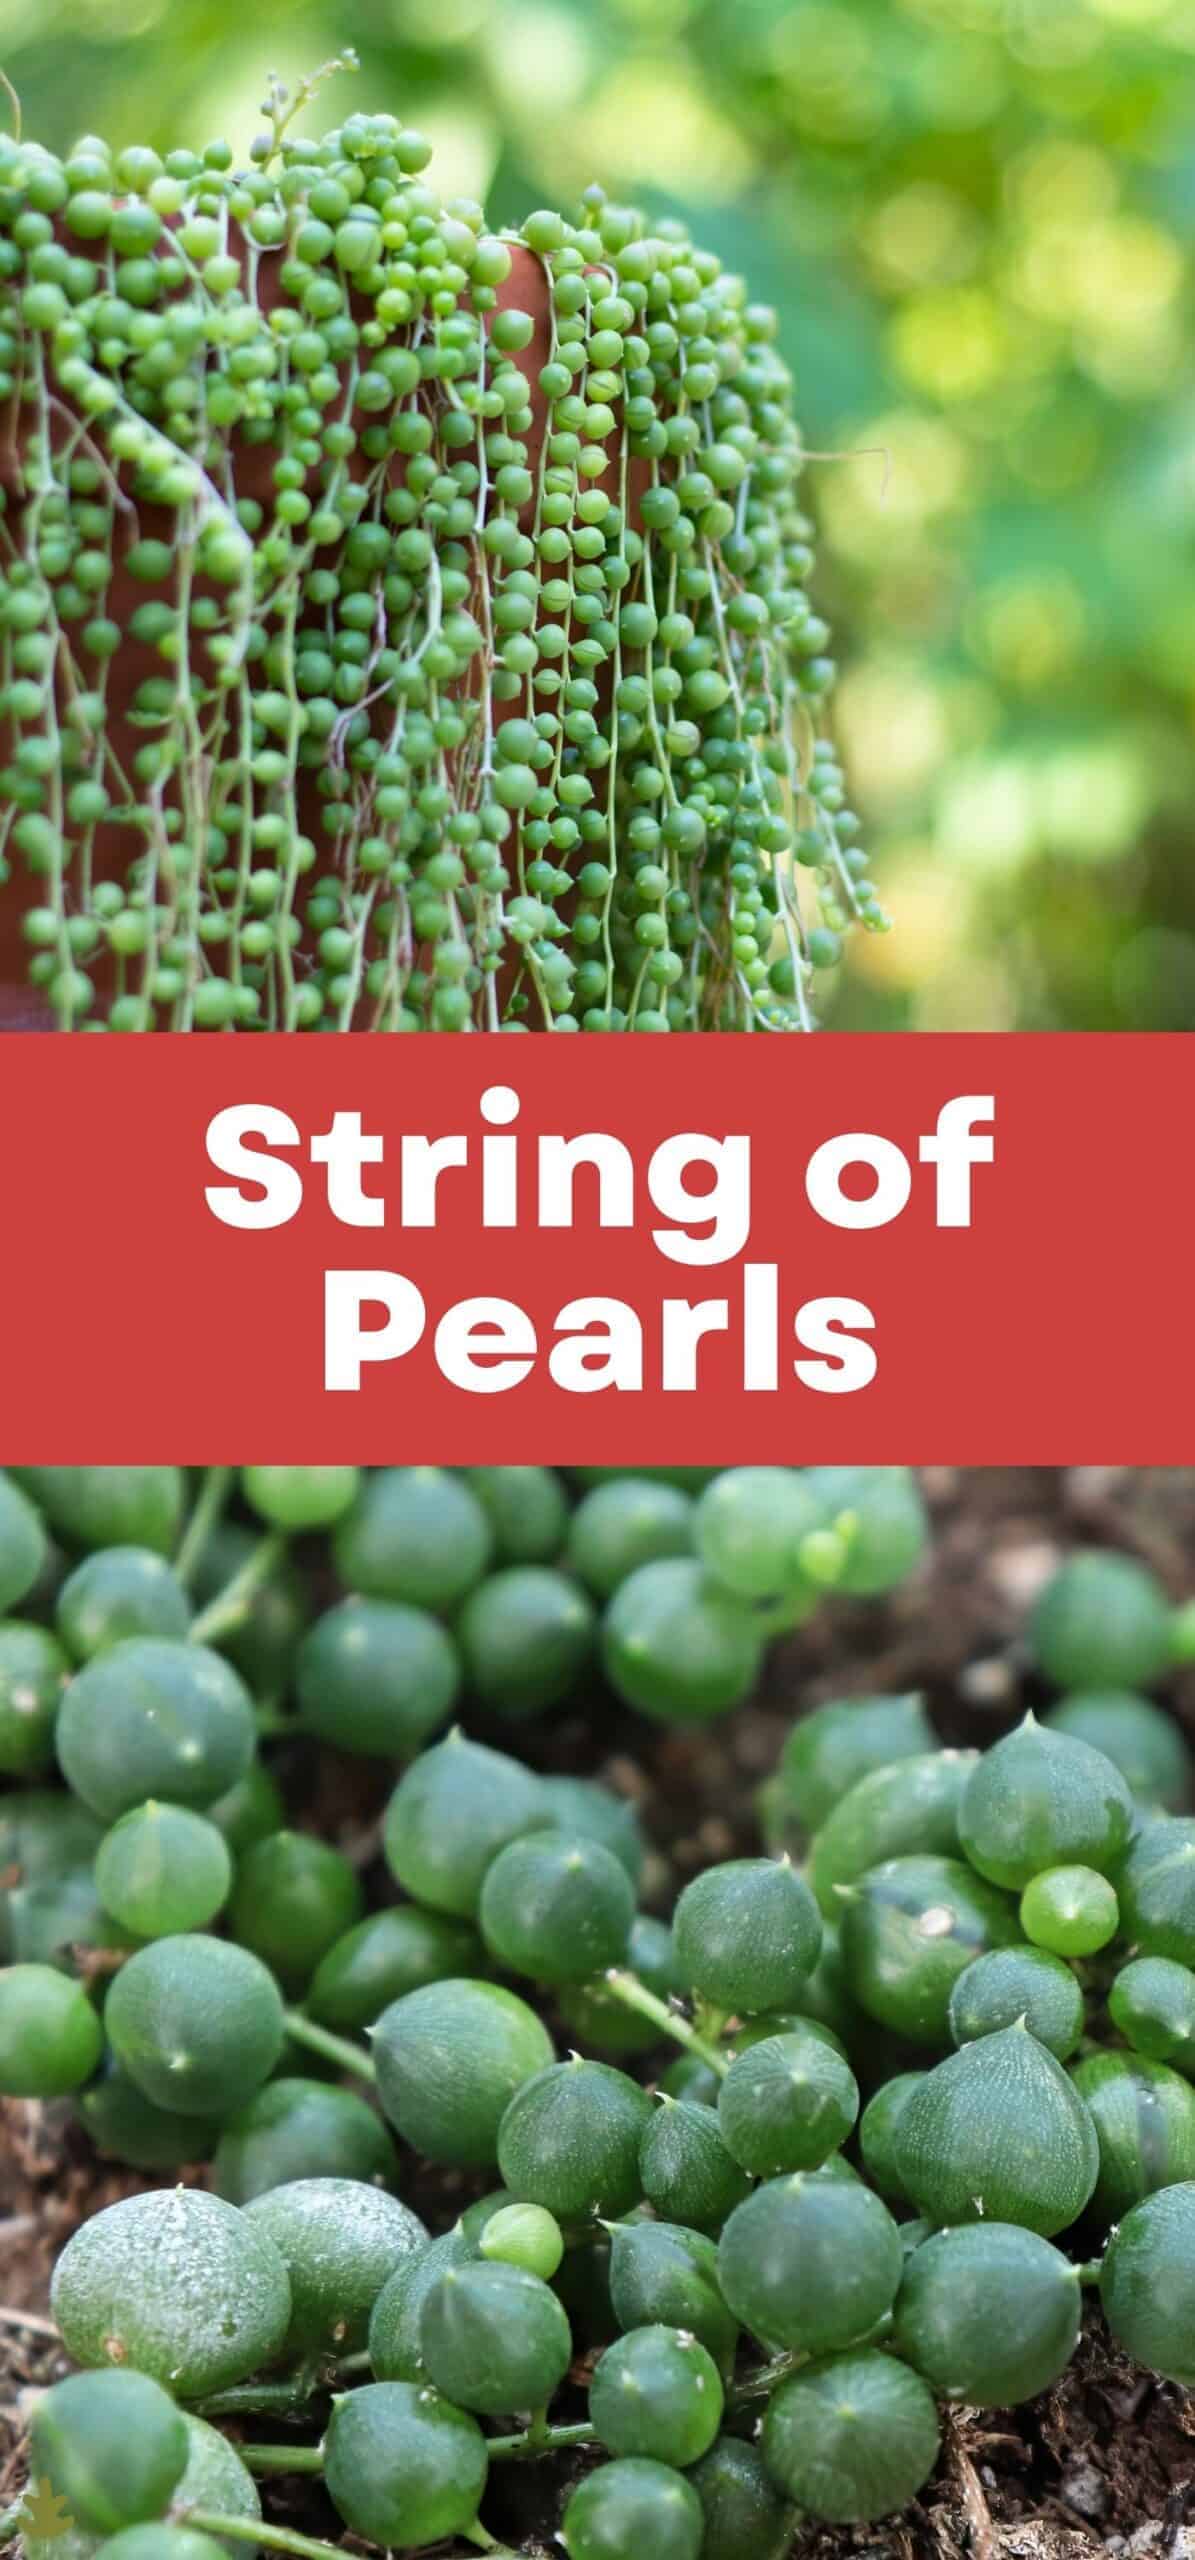 String of Pearls via @home4theharvest